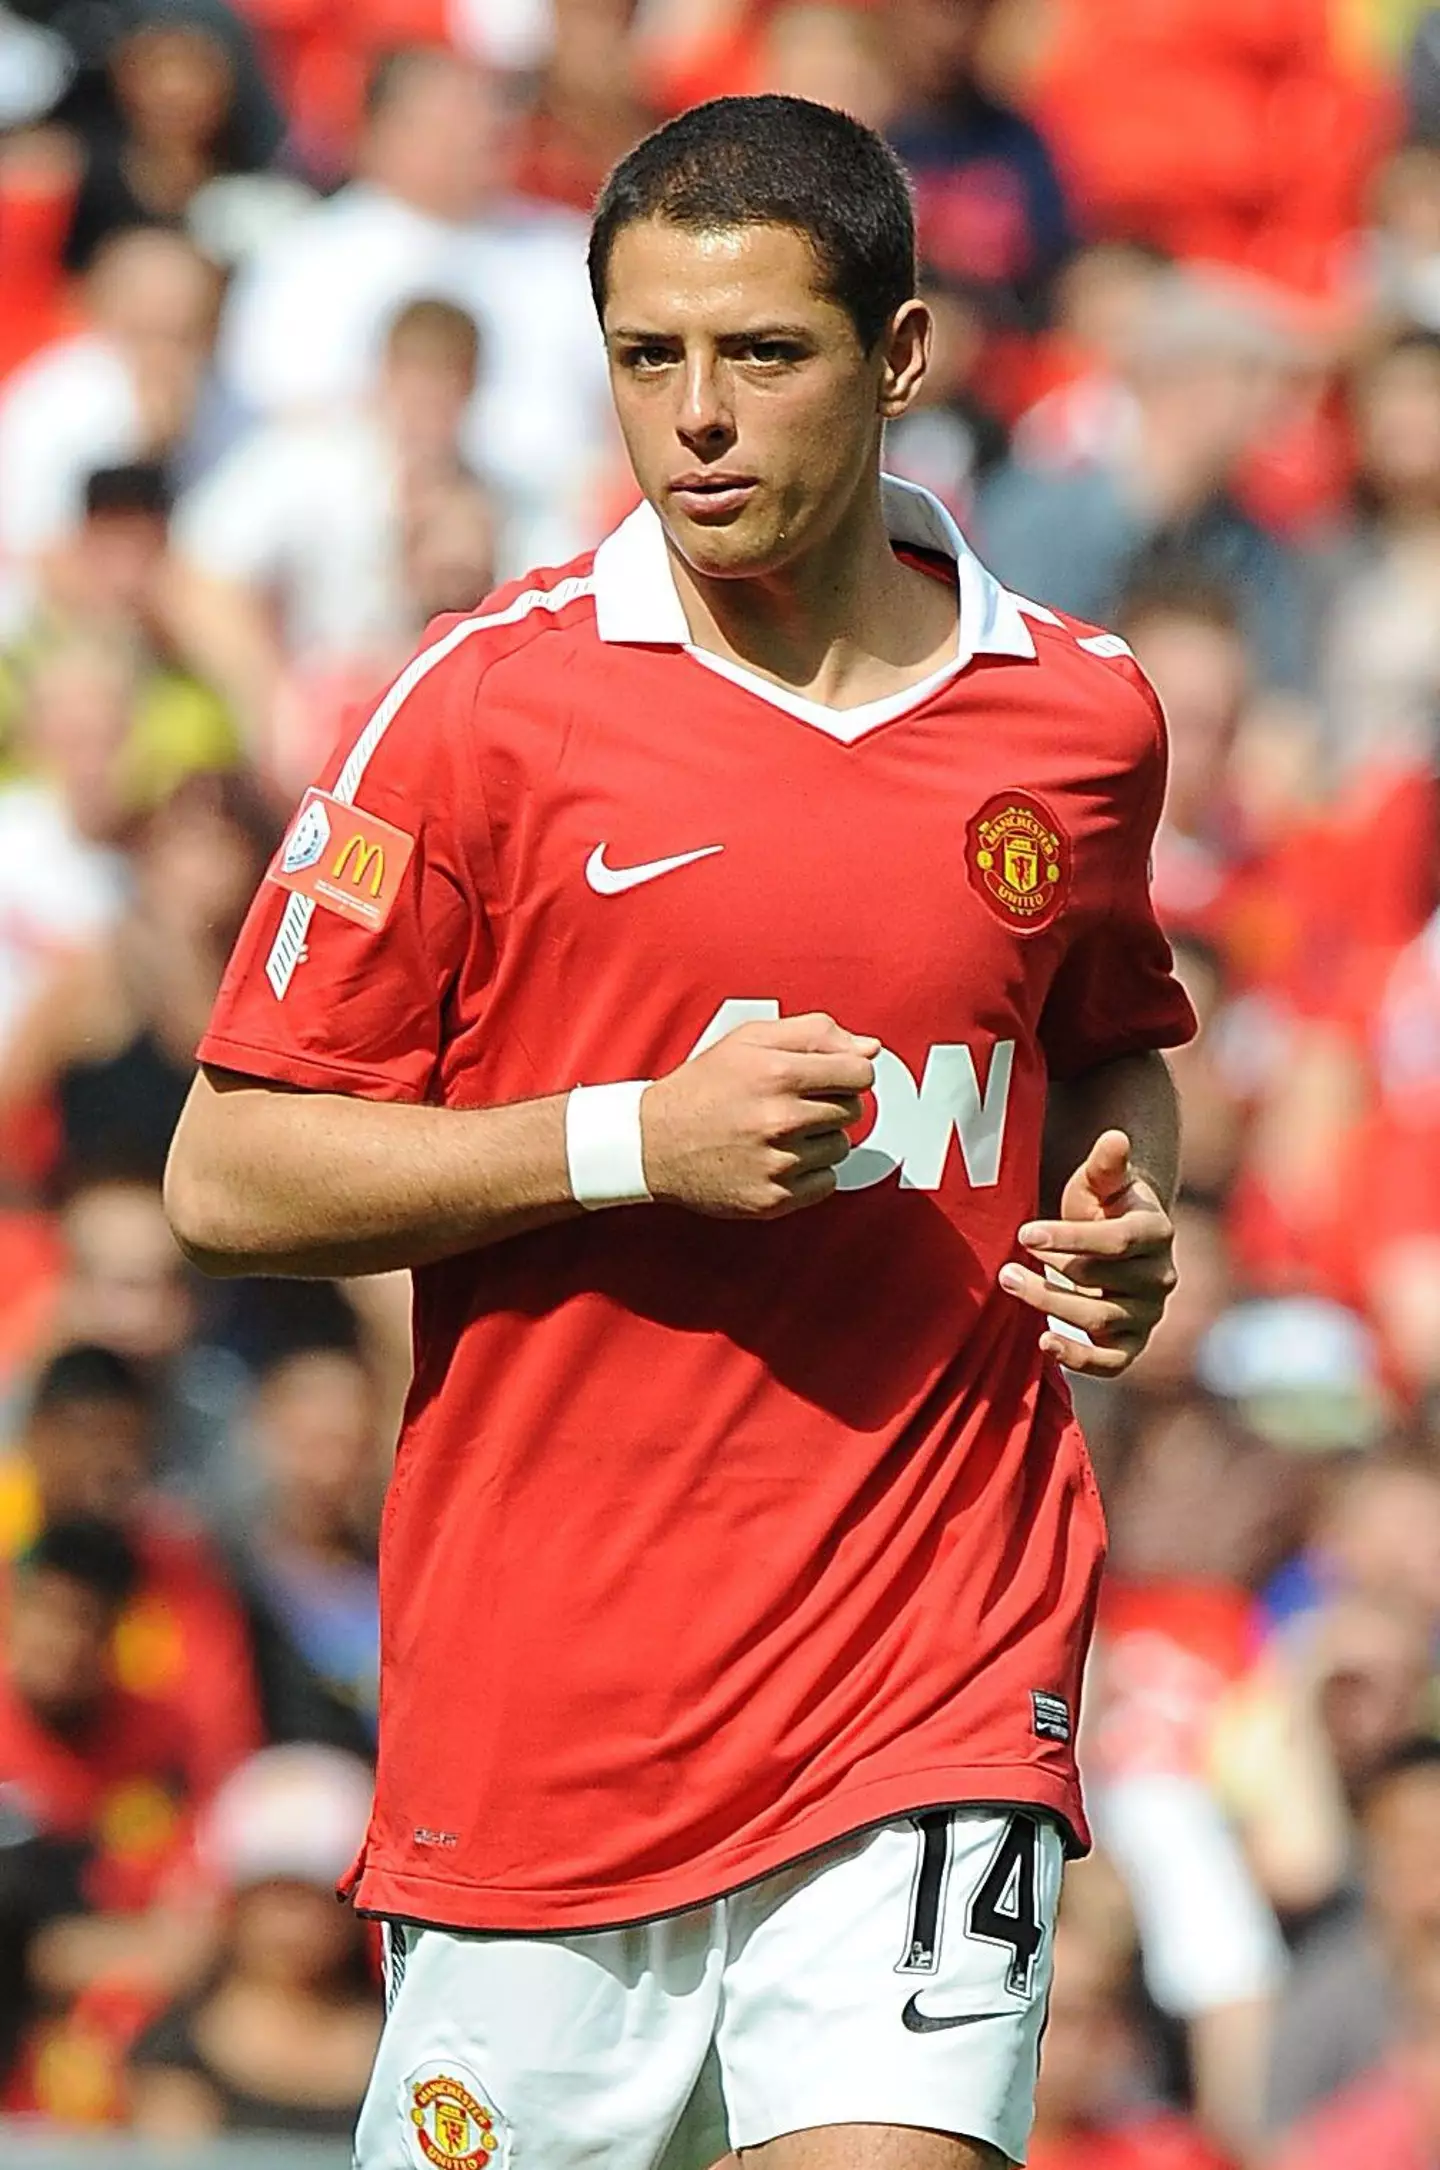 Javier Hernandez with Manchester United in 2010/11 (Alamy)